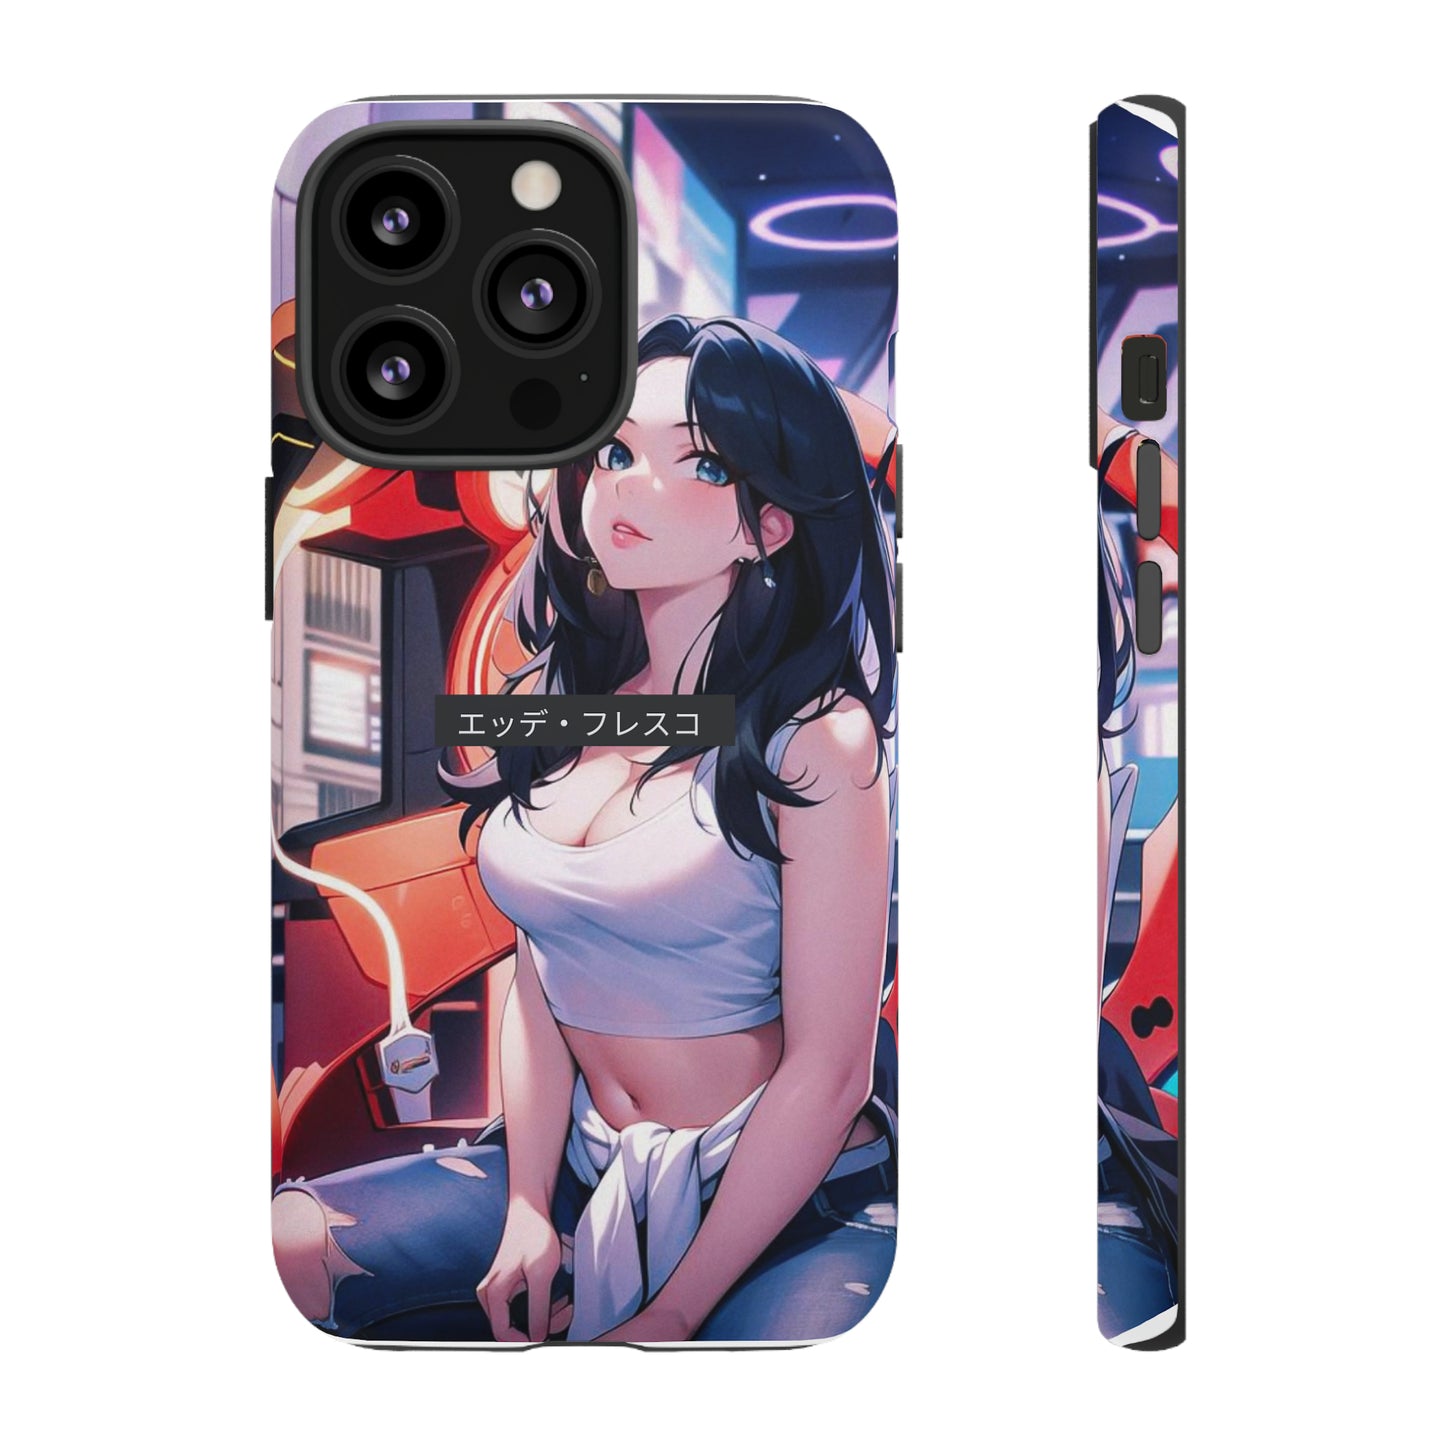 Anime Style Art Tough Cases- "She's at the Arcade"